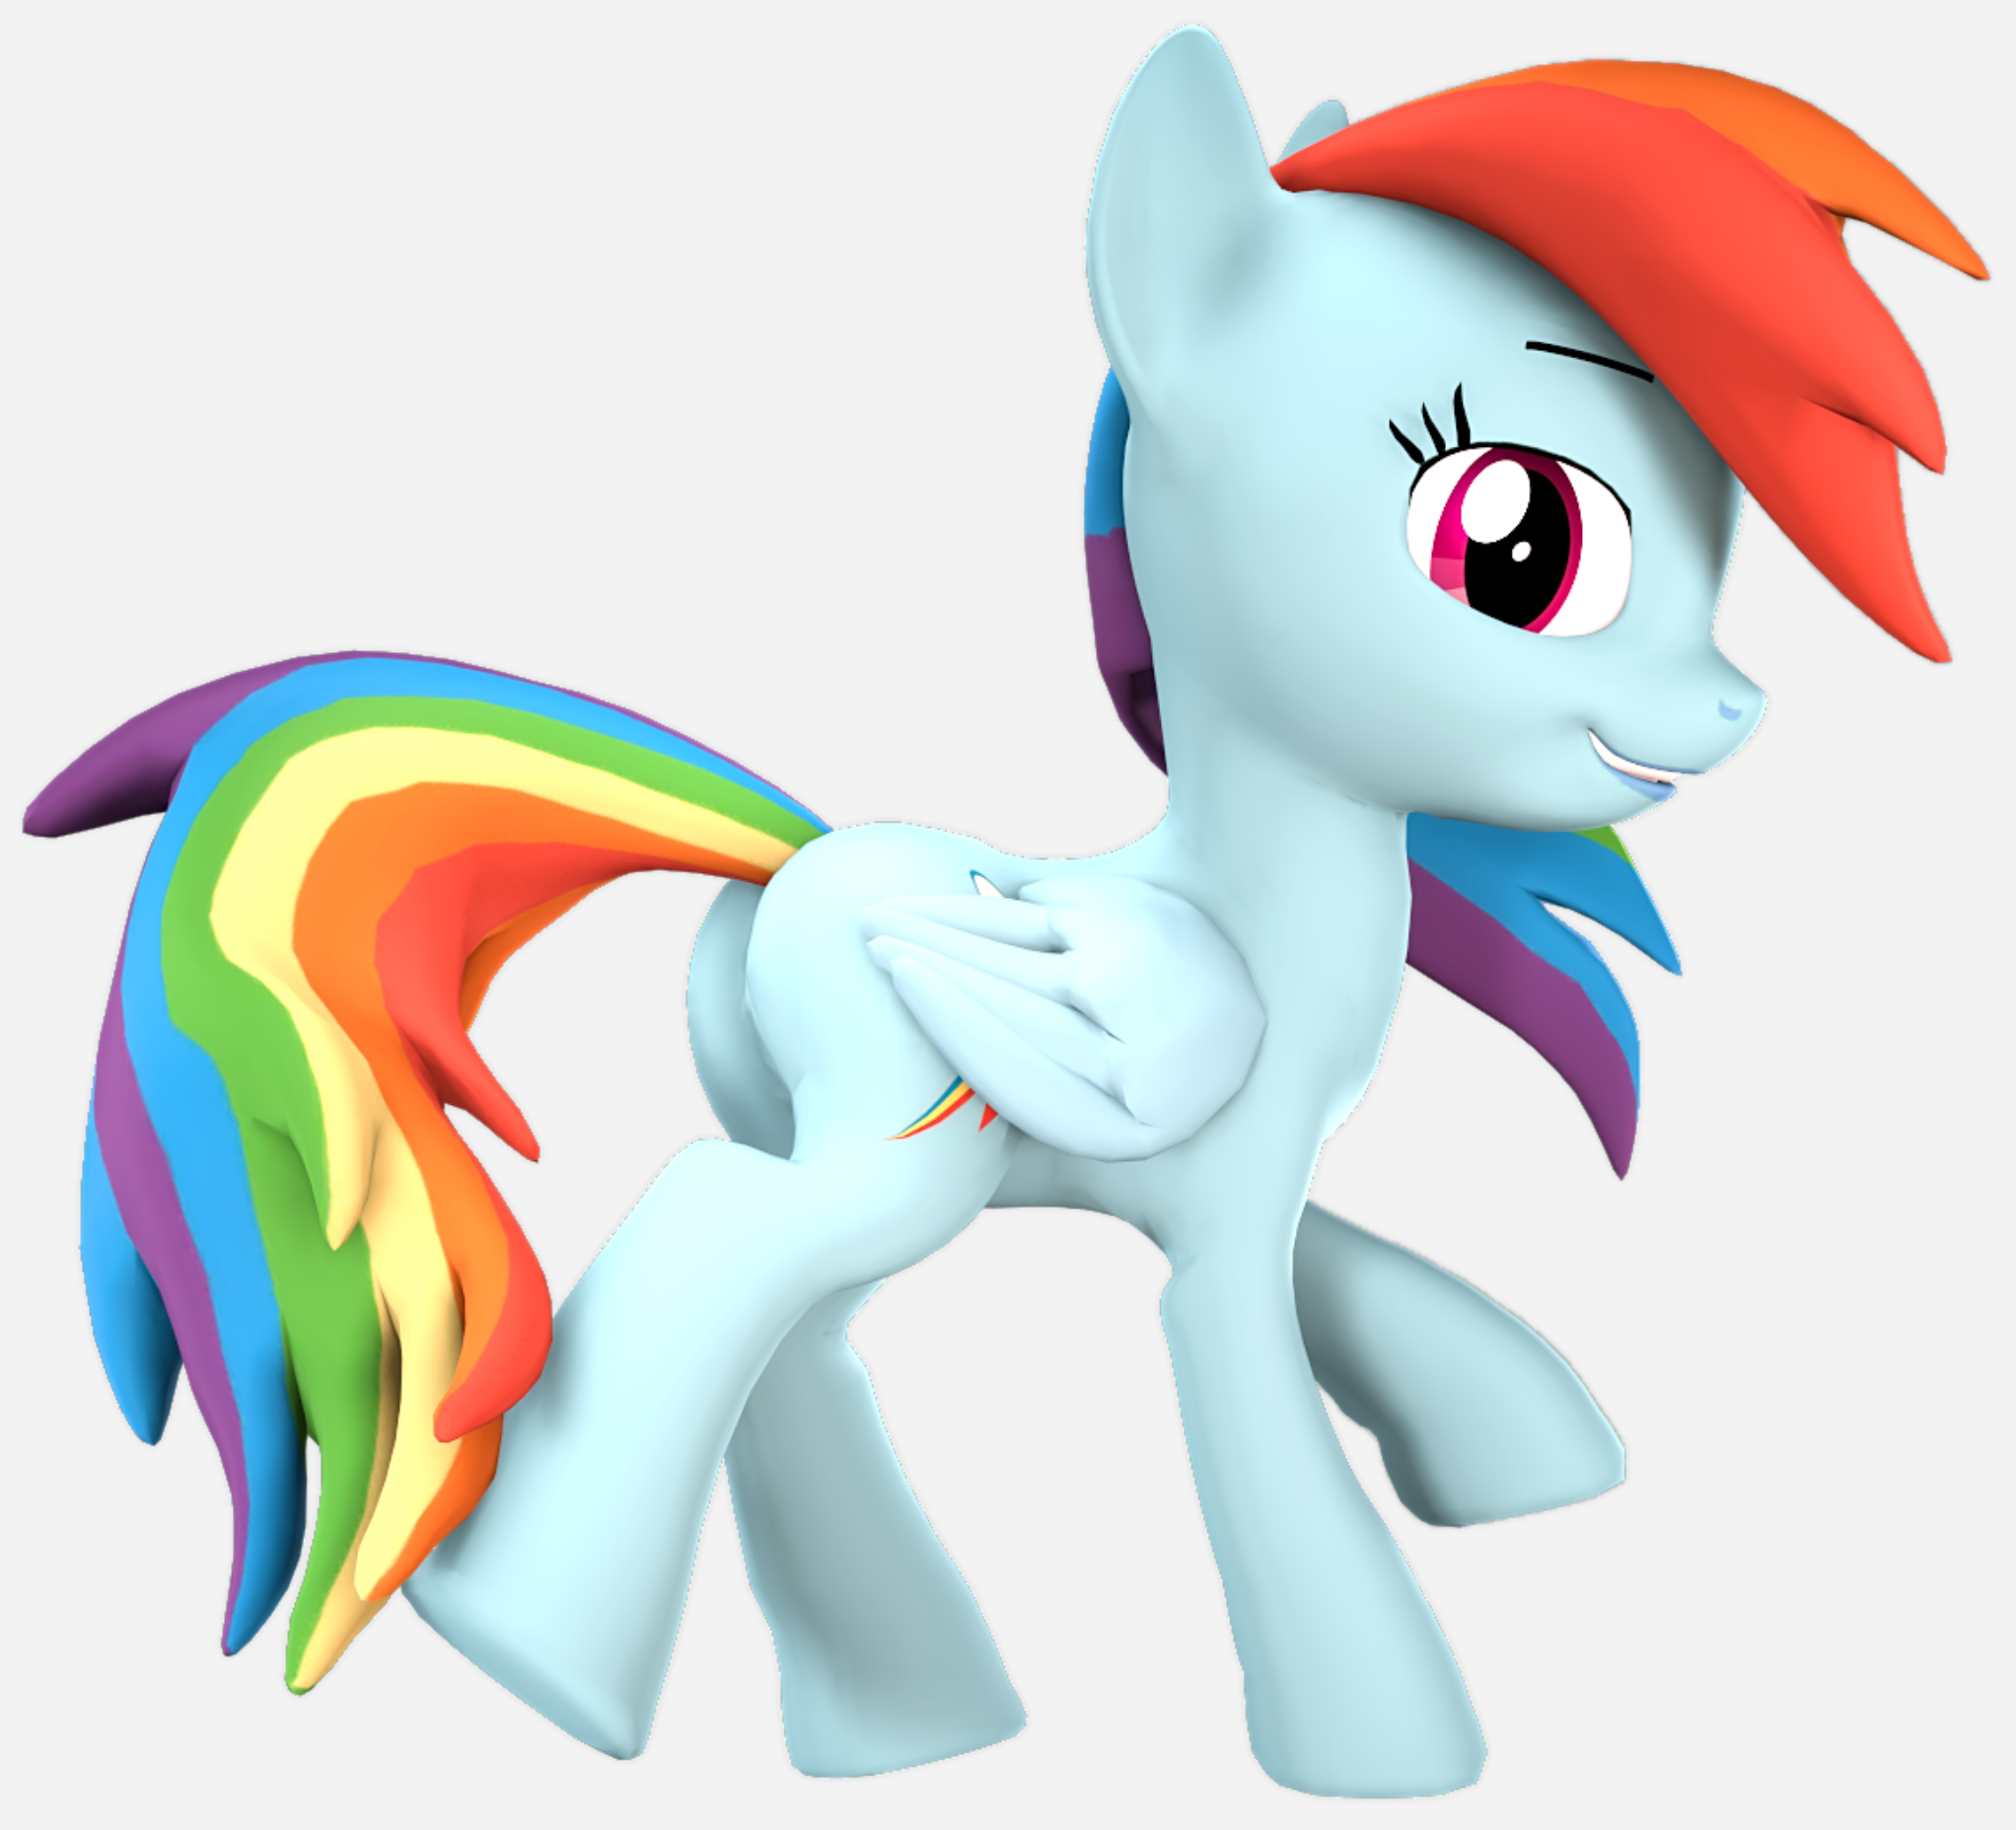 Pone Butts.